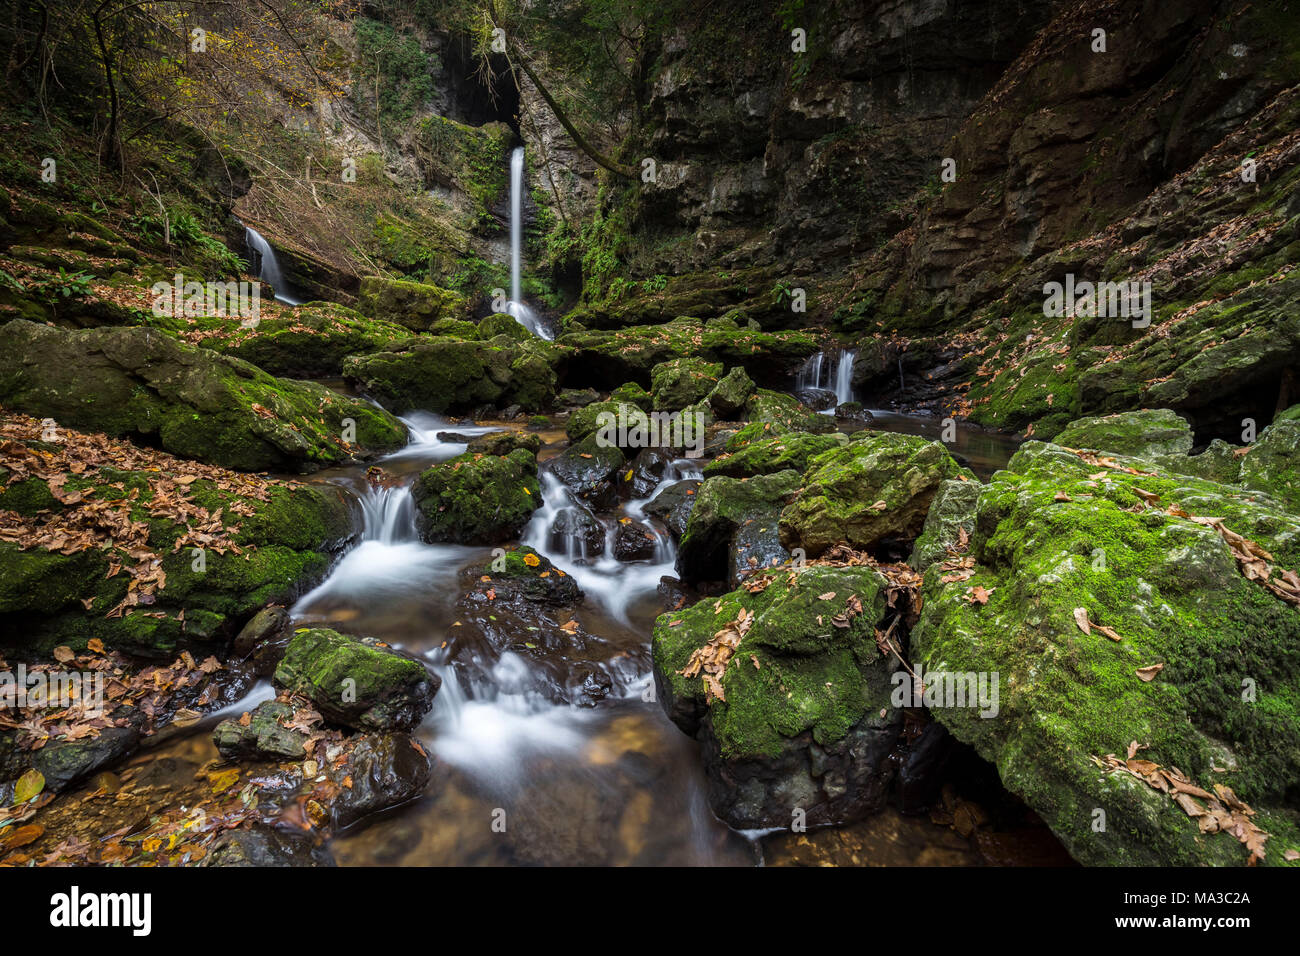 The upper Ferrera waterfalls in an autumn, Ferrera di Varese, Varese district, Lombardy, Italy. Stock Photo